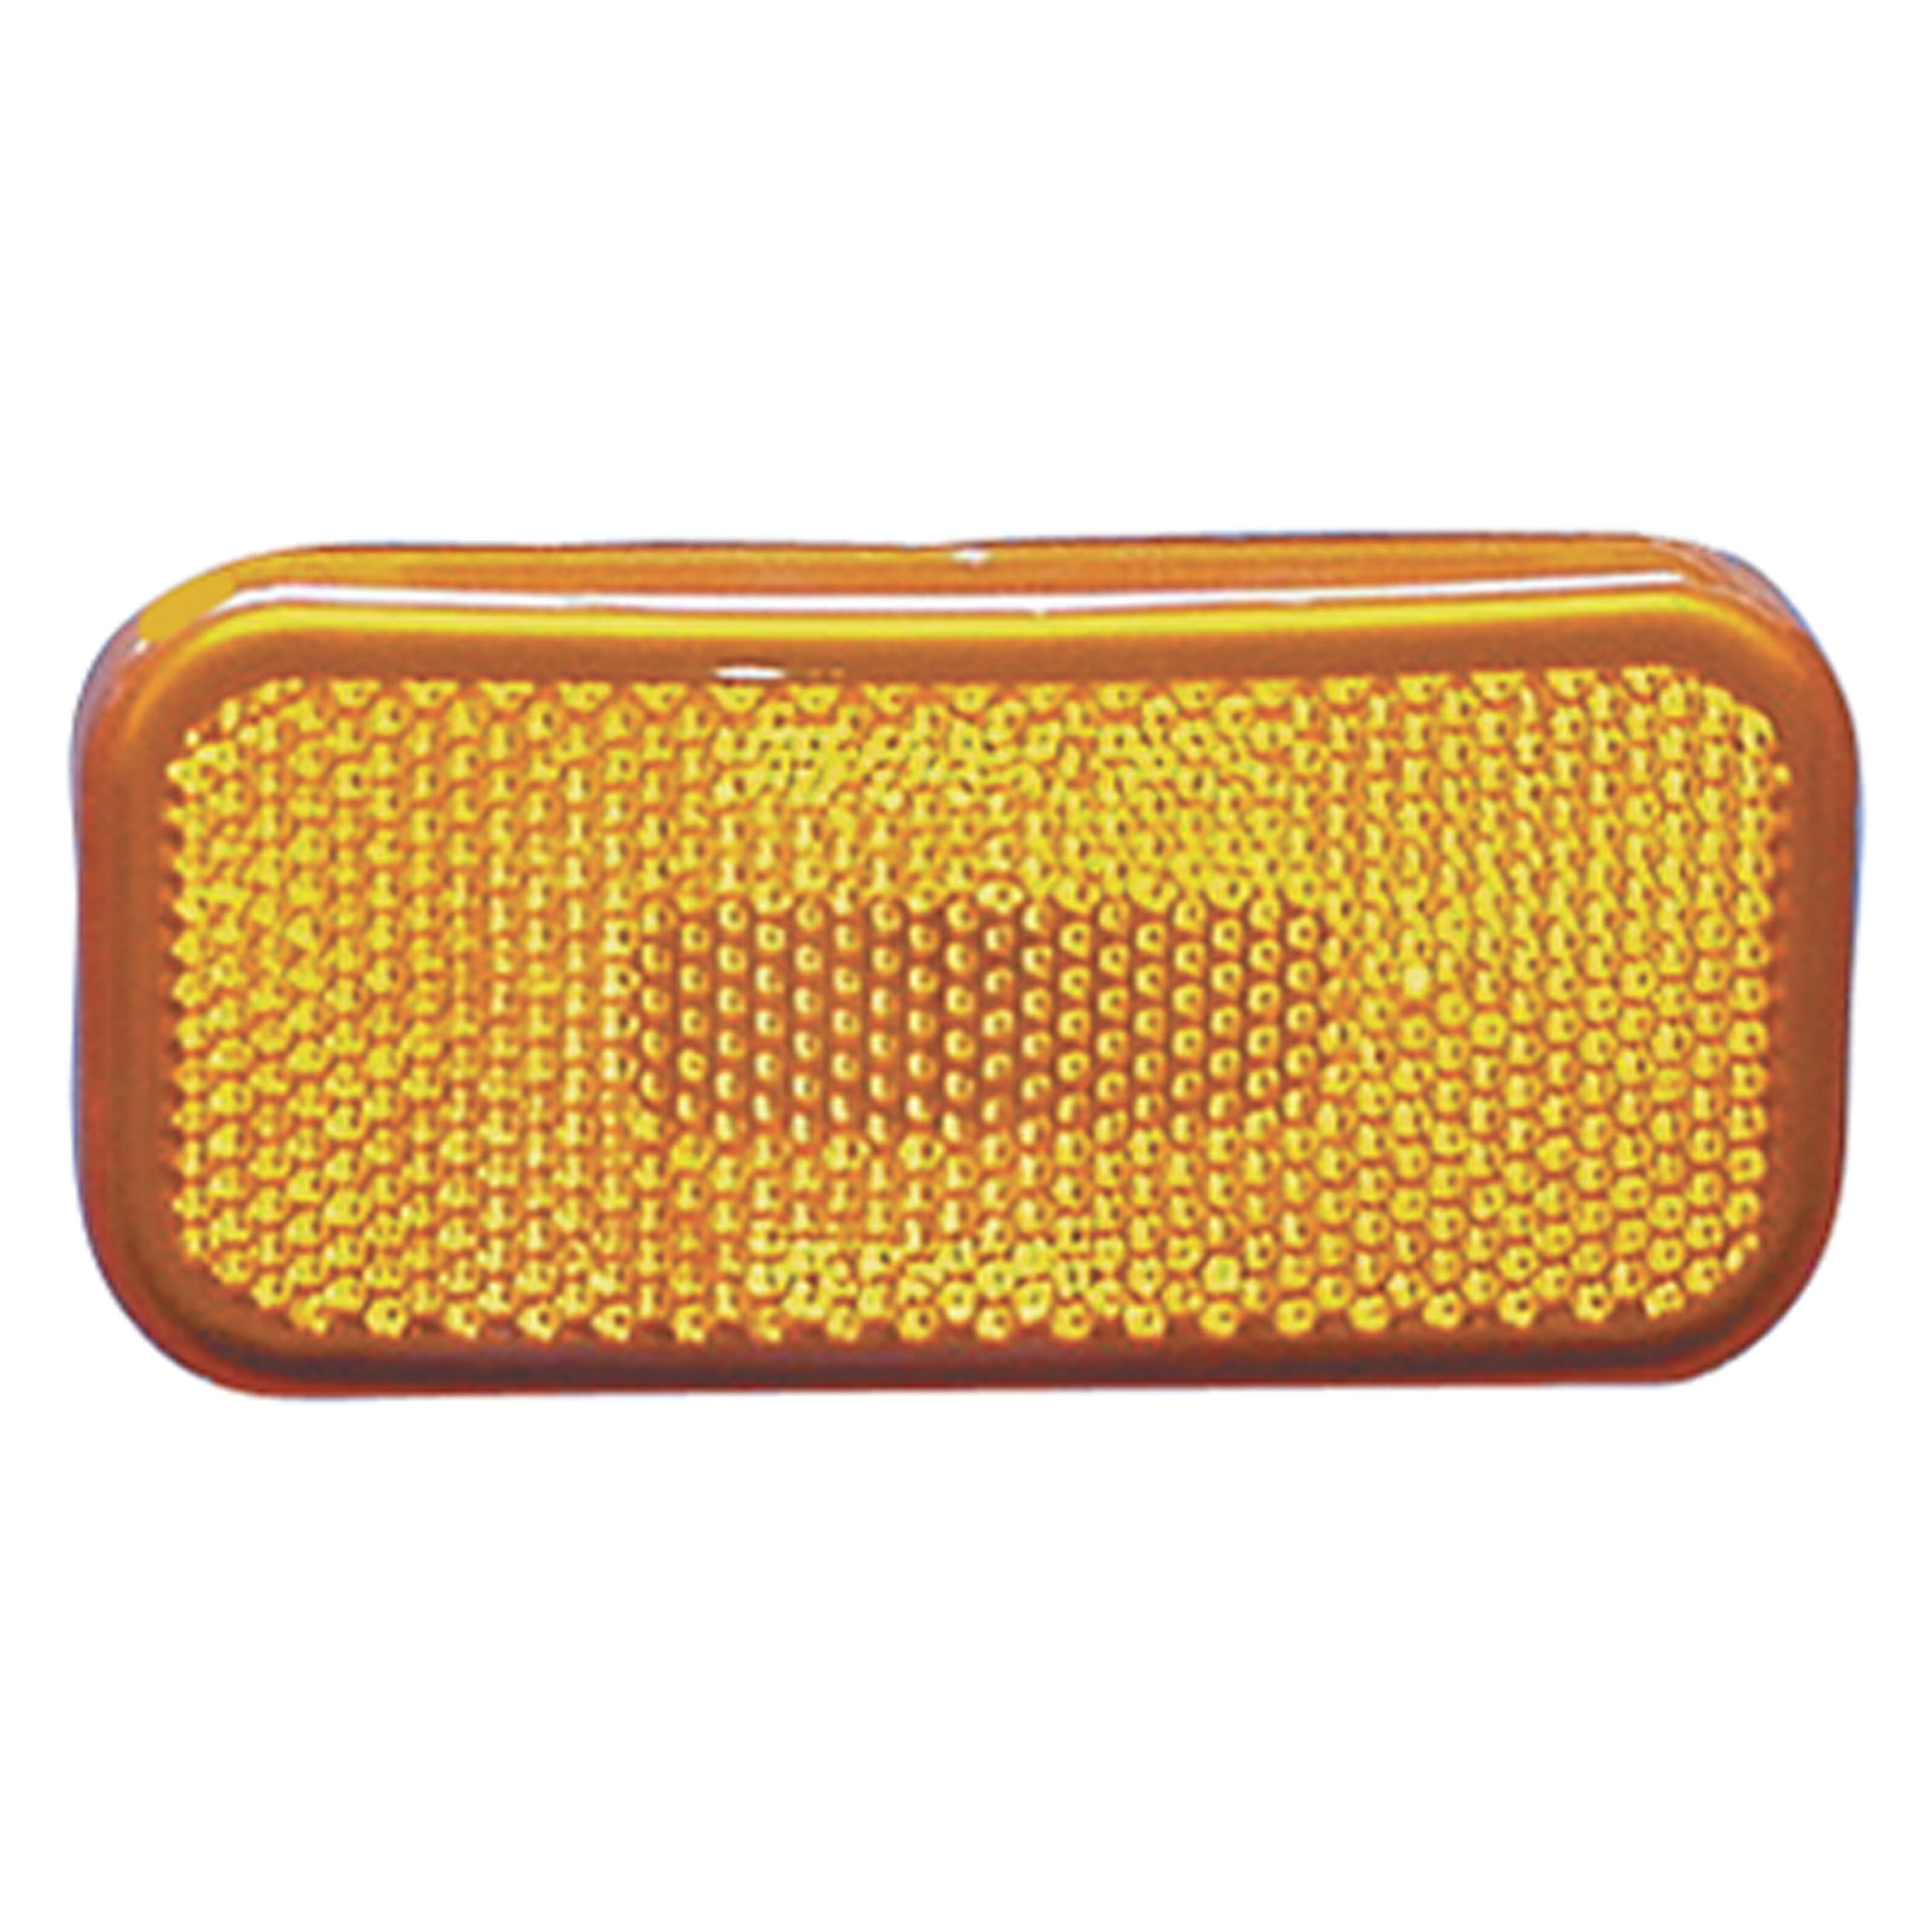 Fasteners Unlimited 003-59 Command Electronics Rounded Corner Clearance Light - Amber with White Base